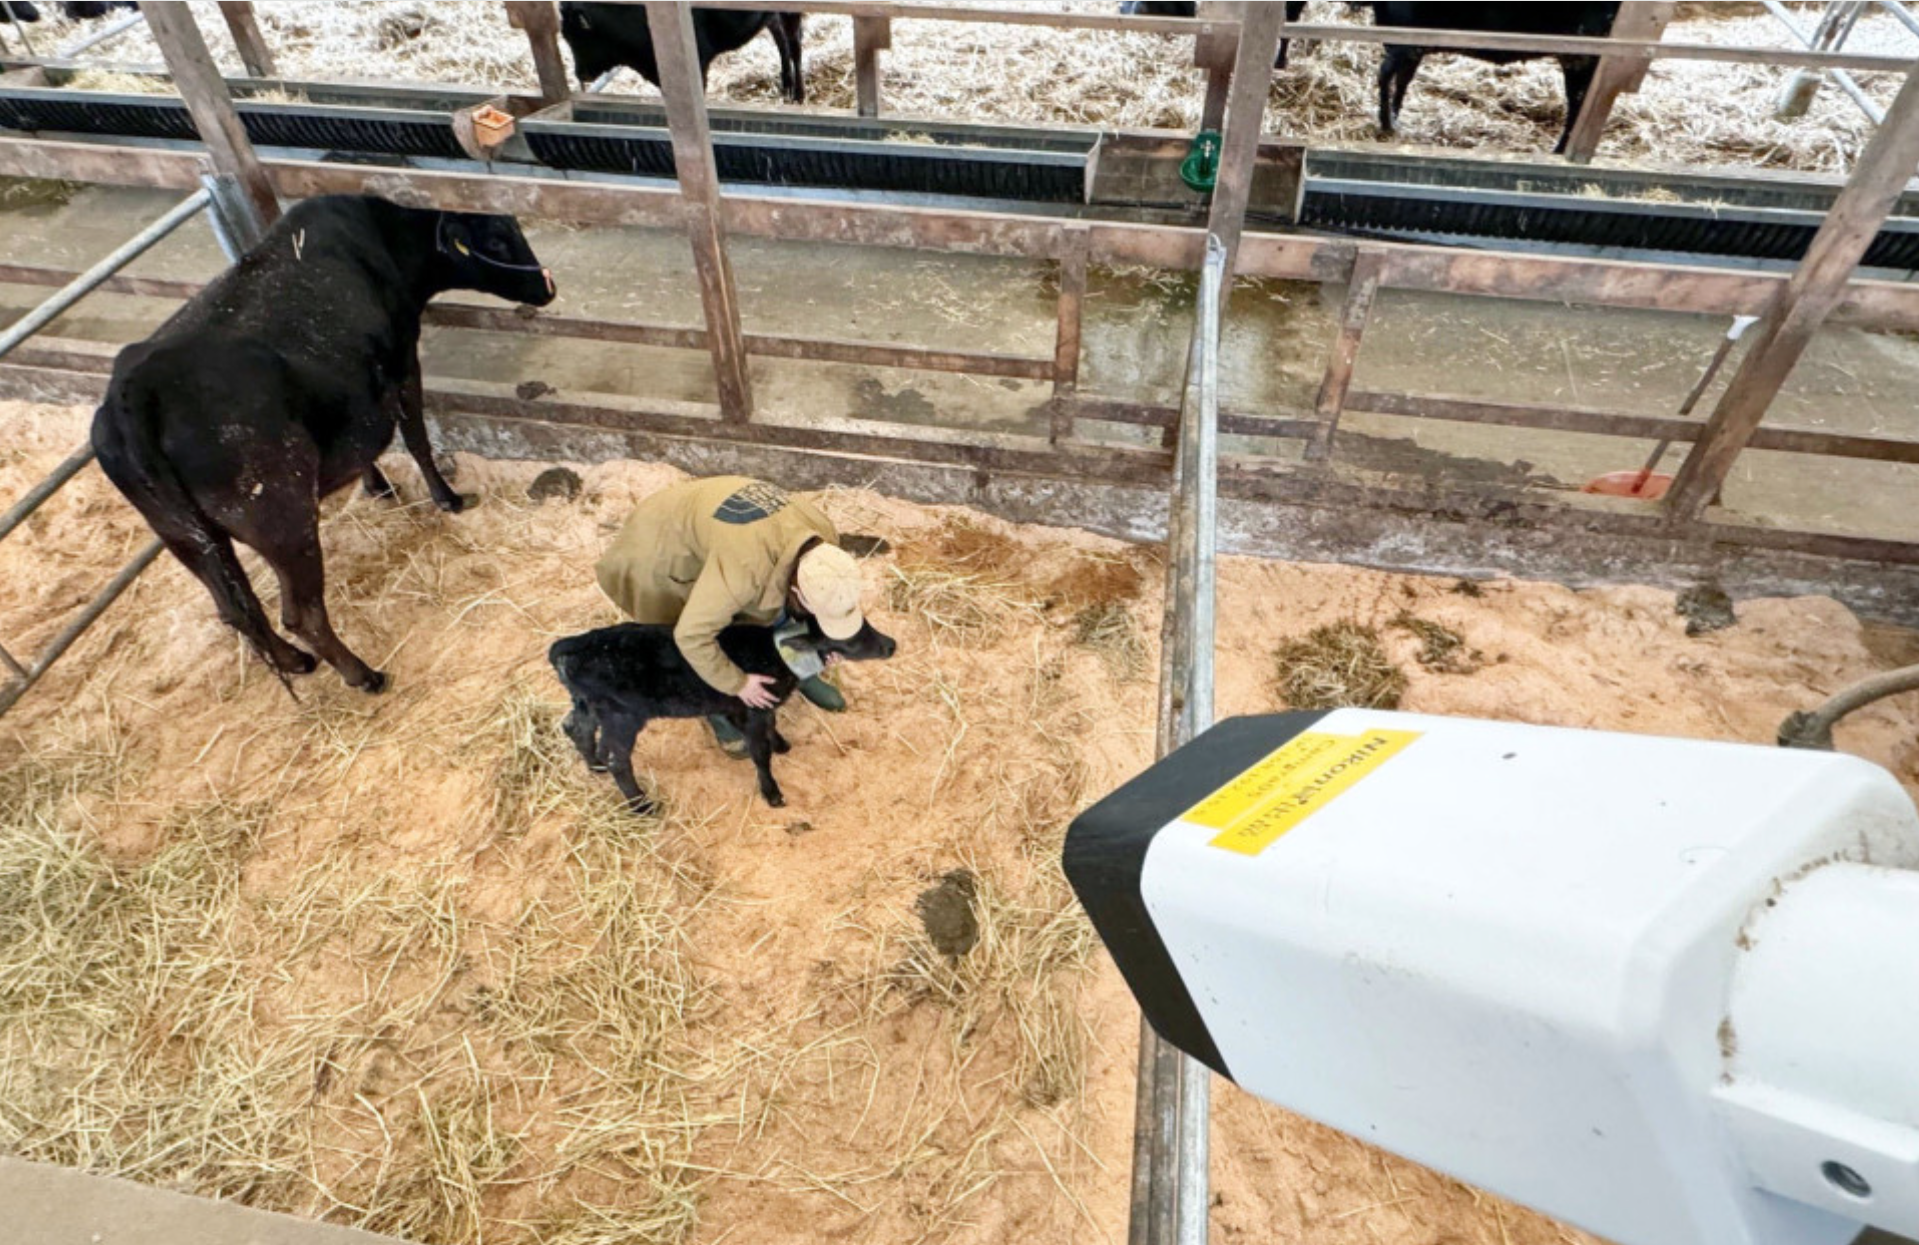 Nikon’s AI camera system monitors a cow’s movements and recognises when it is going into labour